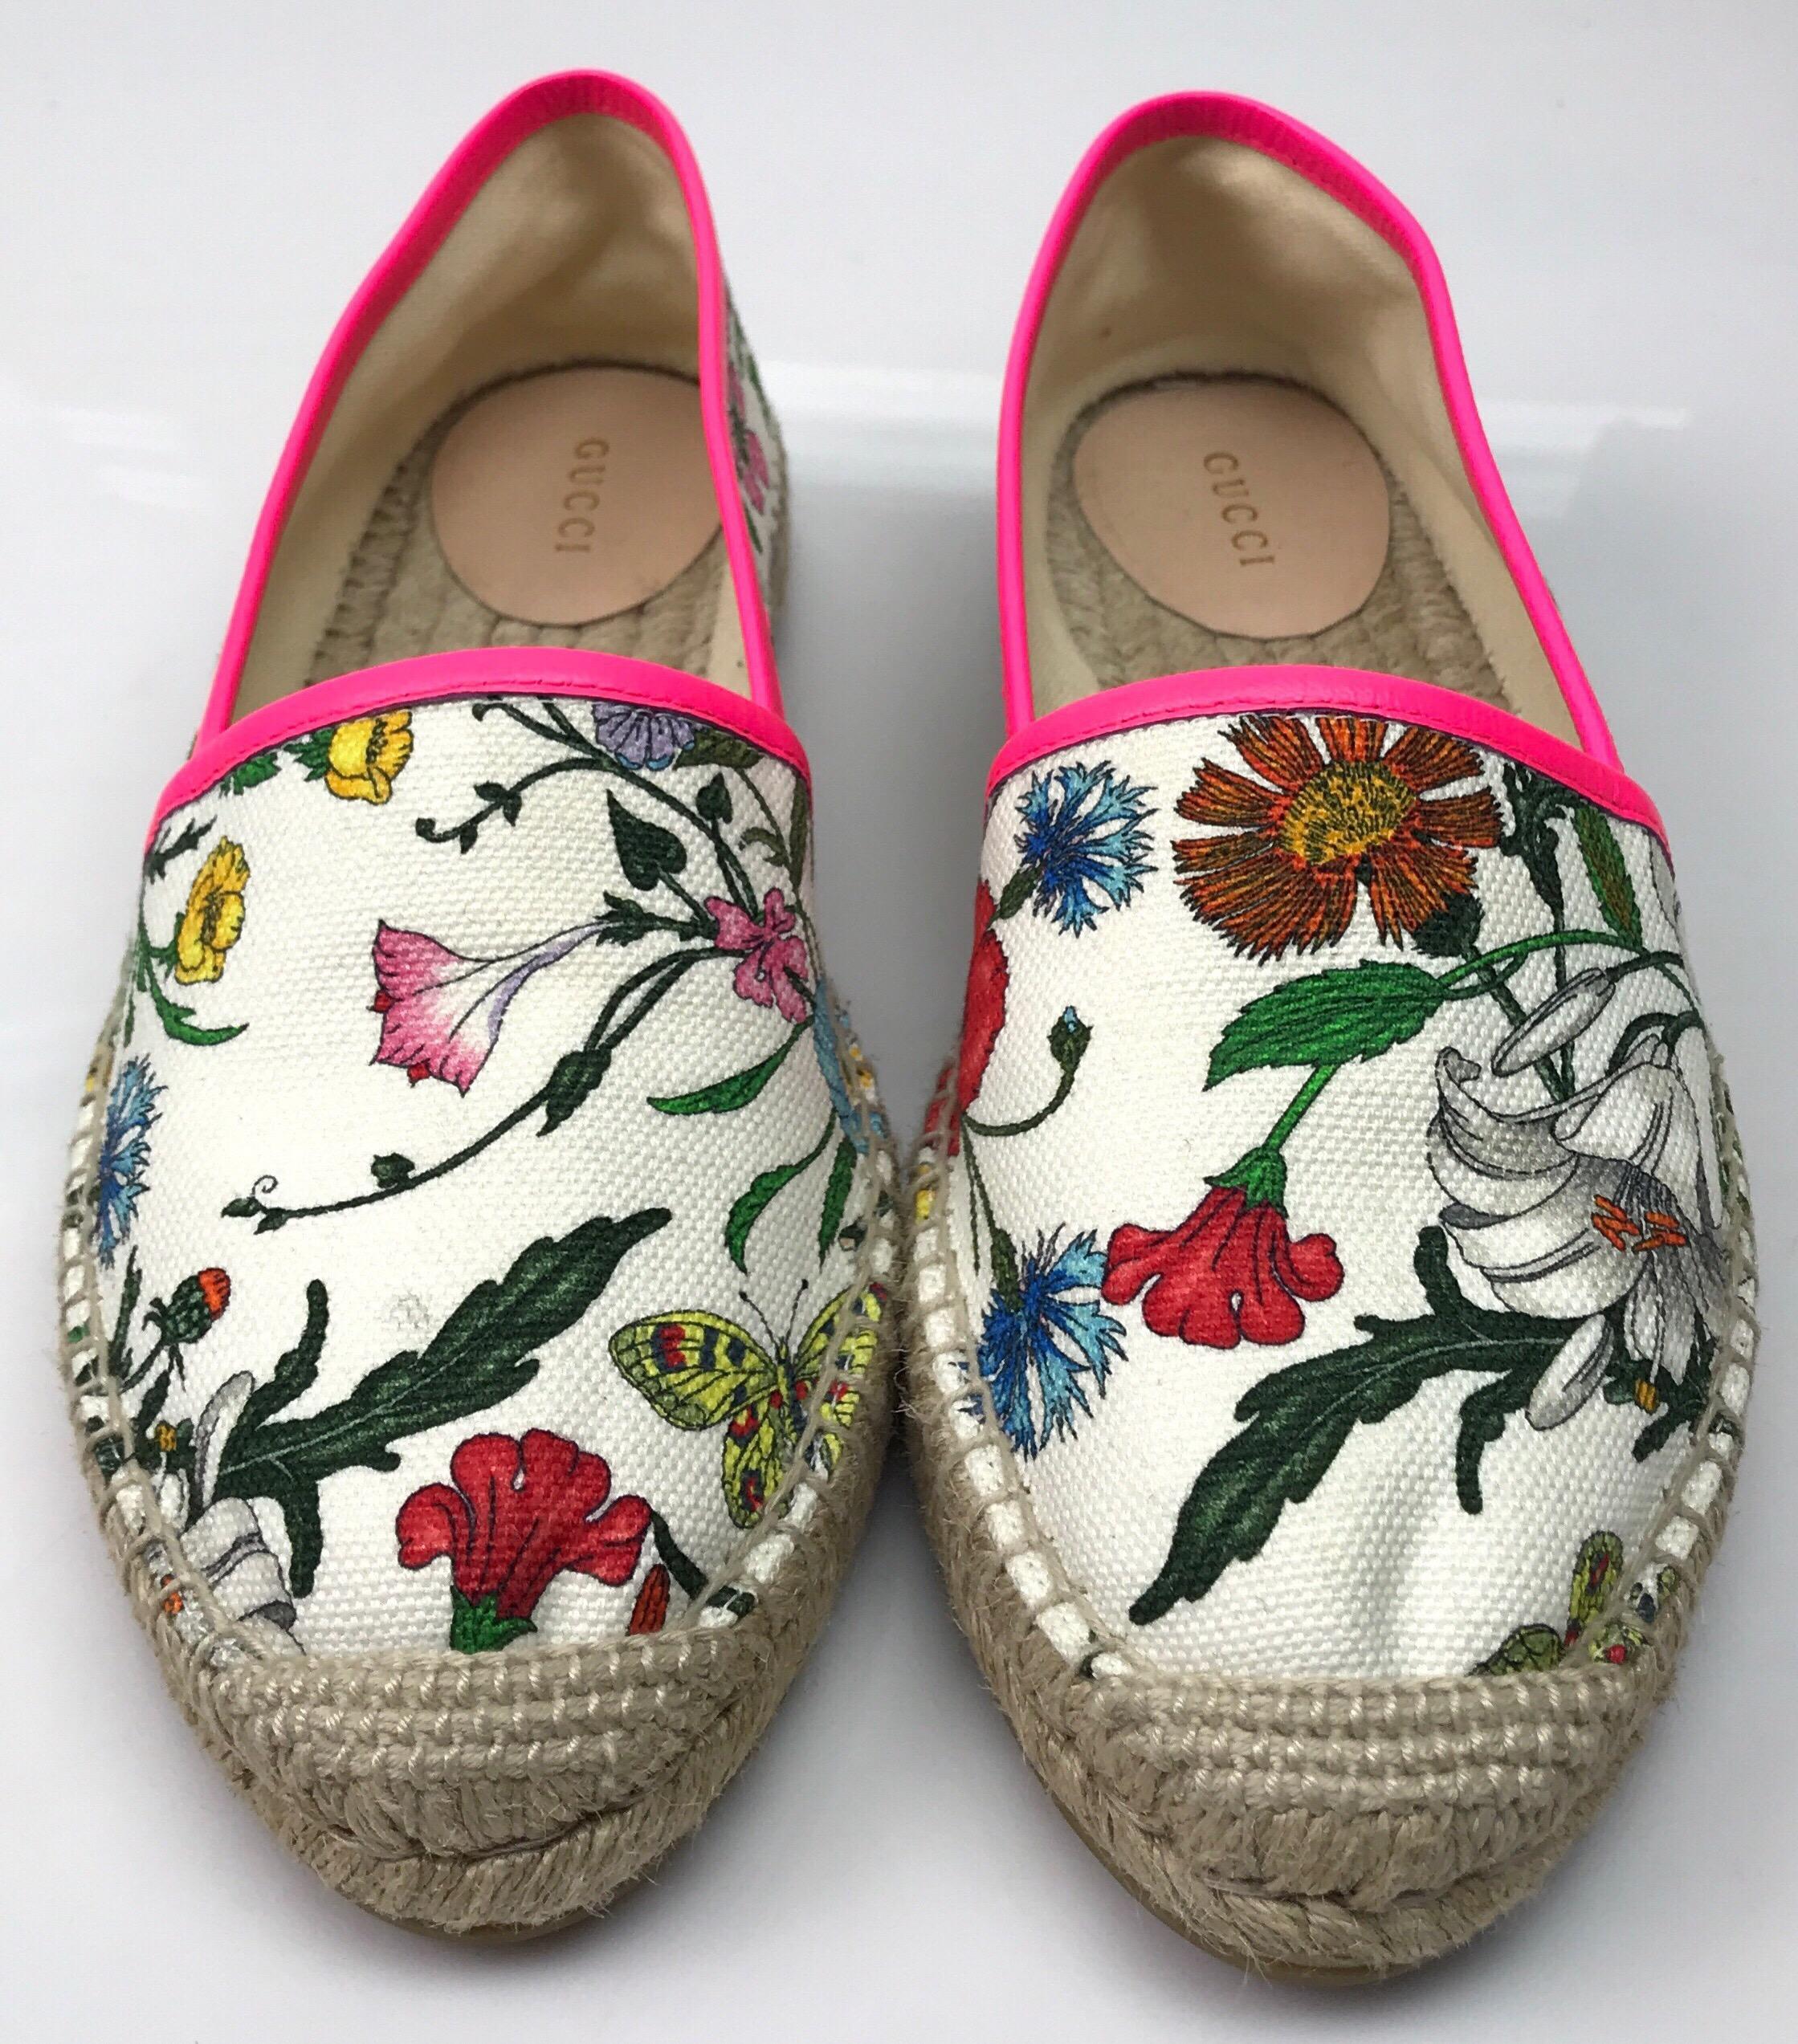 Gucci White Espadrille w/ floral pattern-38. These beautiful Gucci espadrilles are in great condition. They have small dirt marks, as shown in picture. They are a white cloth material with a floral pattern throughout. There is hot pink leather